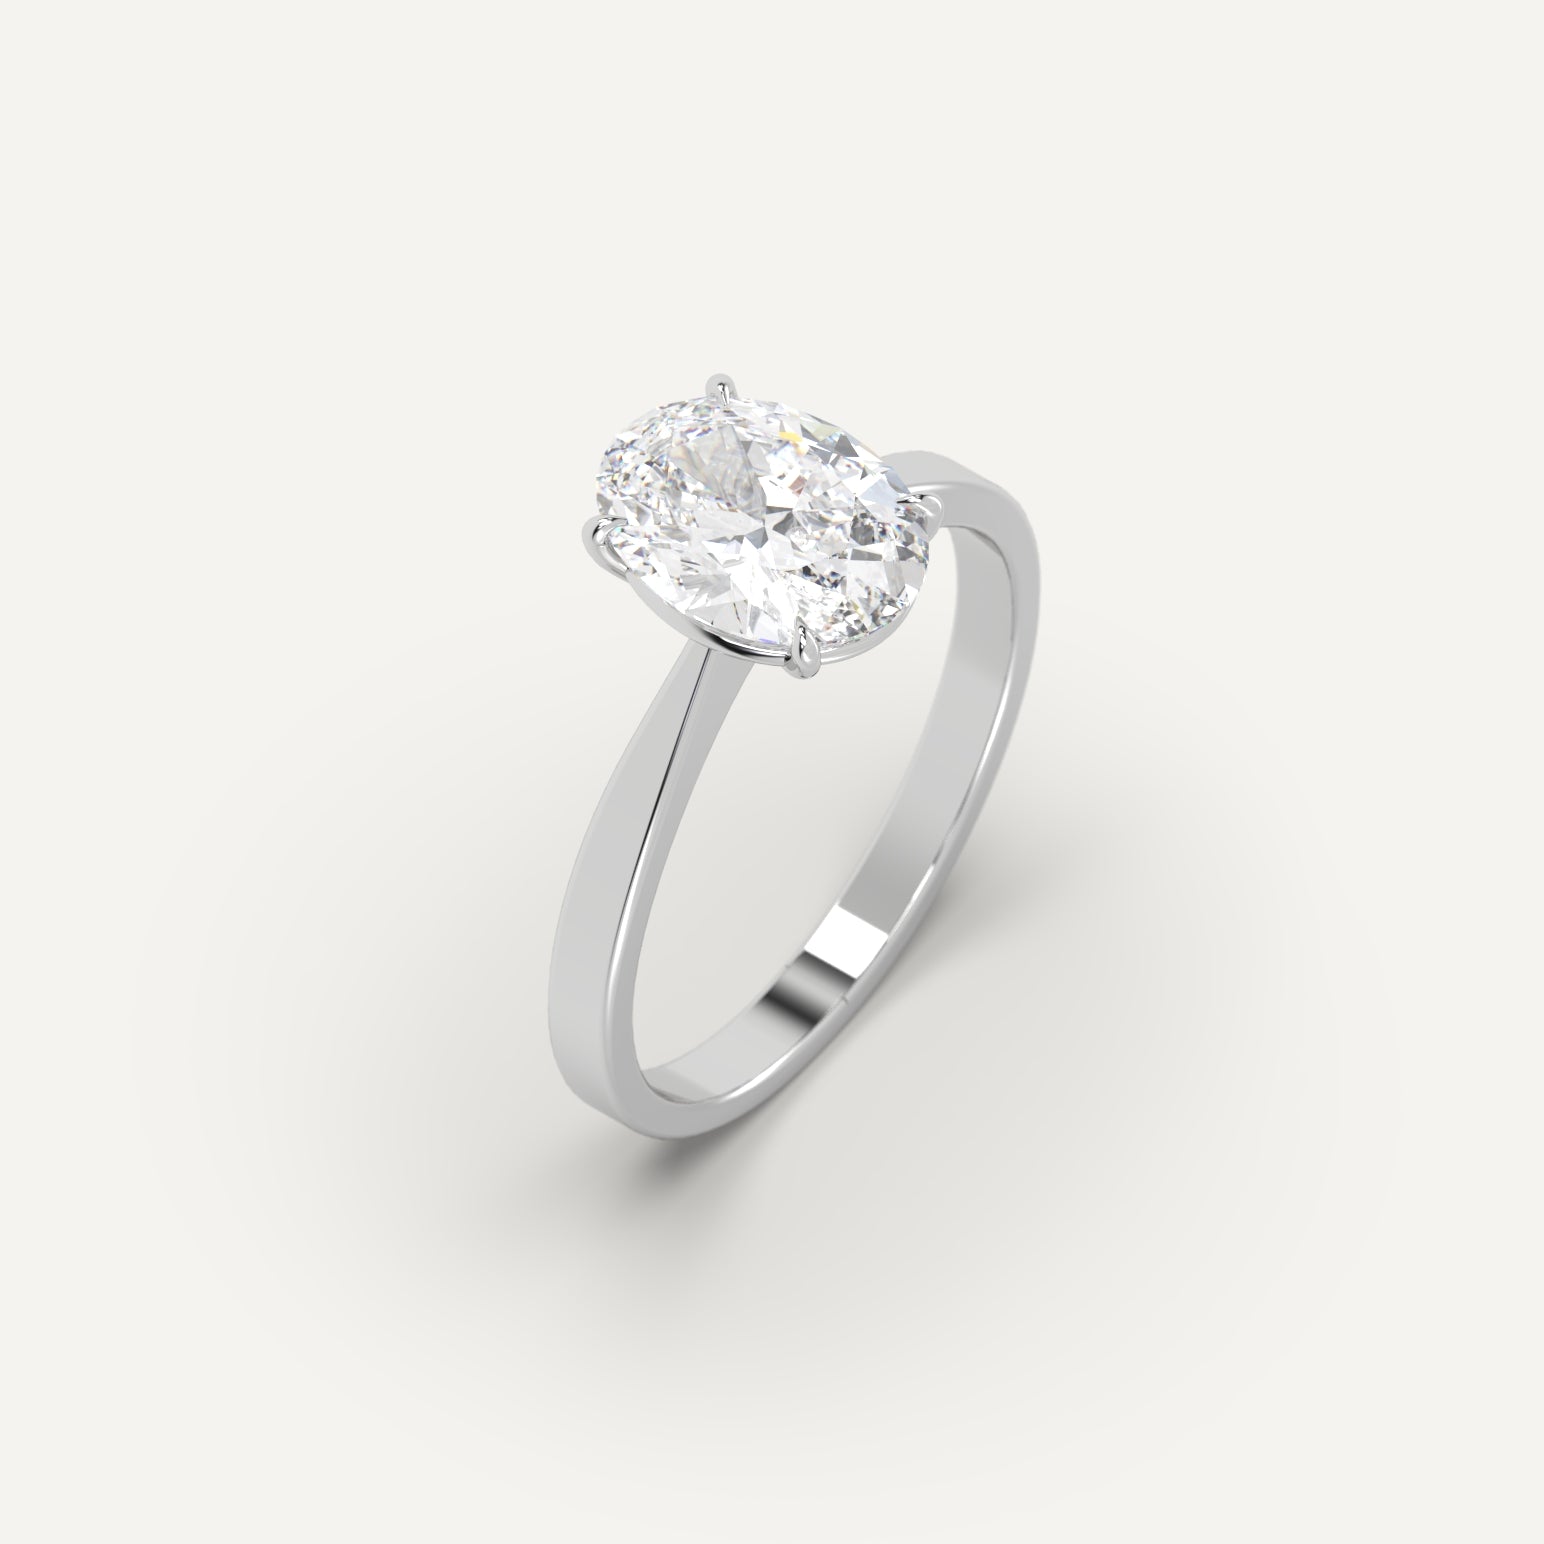 2 carat Oval Cut Engagement Ring in 14k White Gold